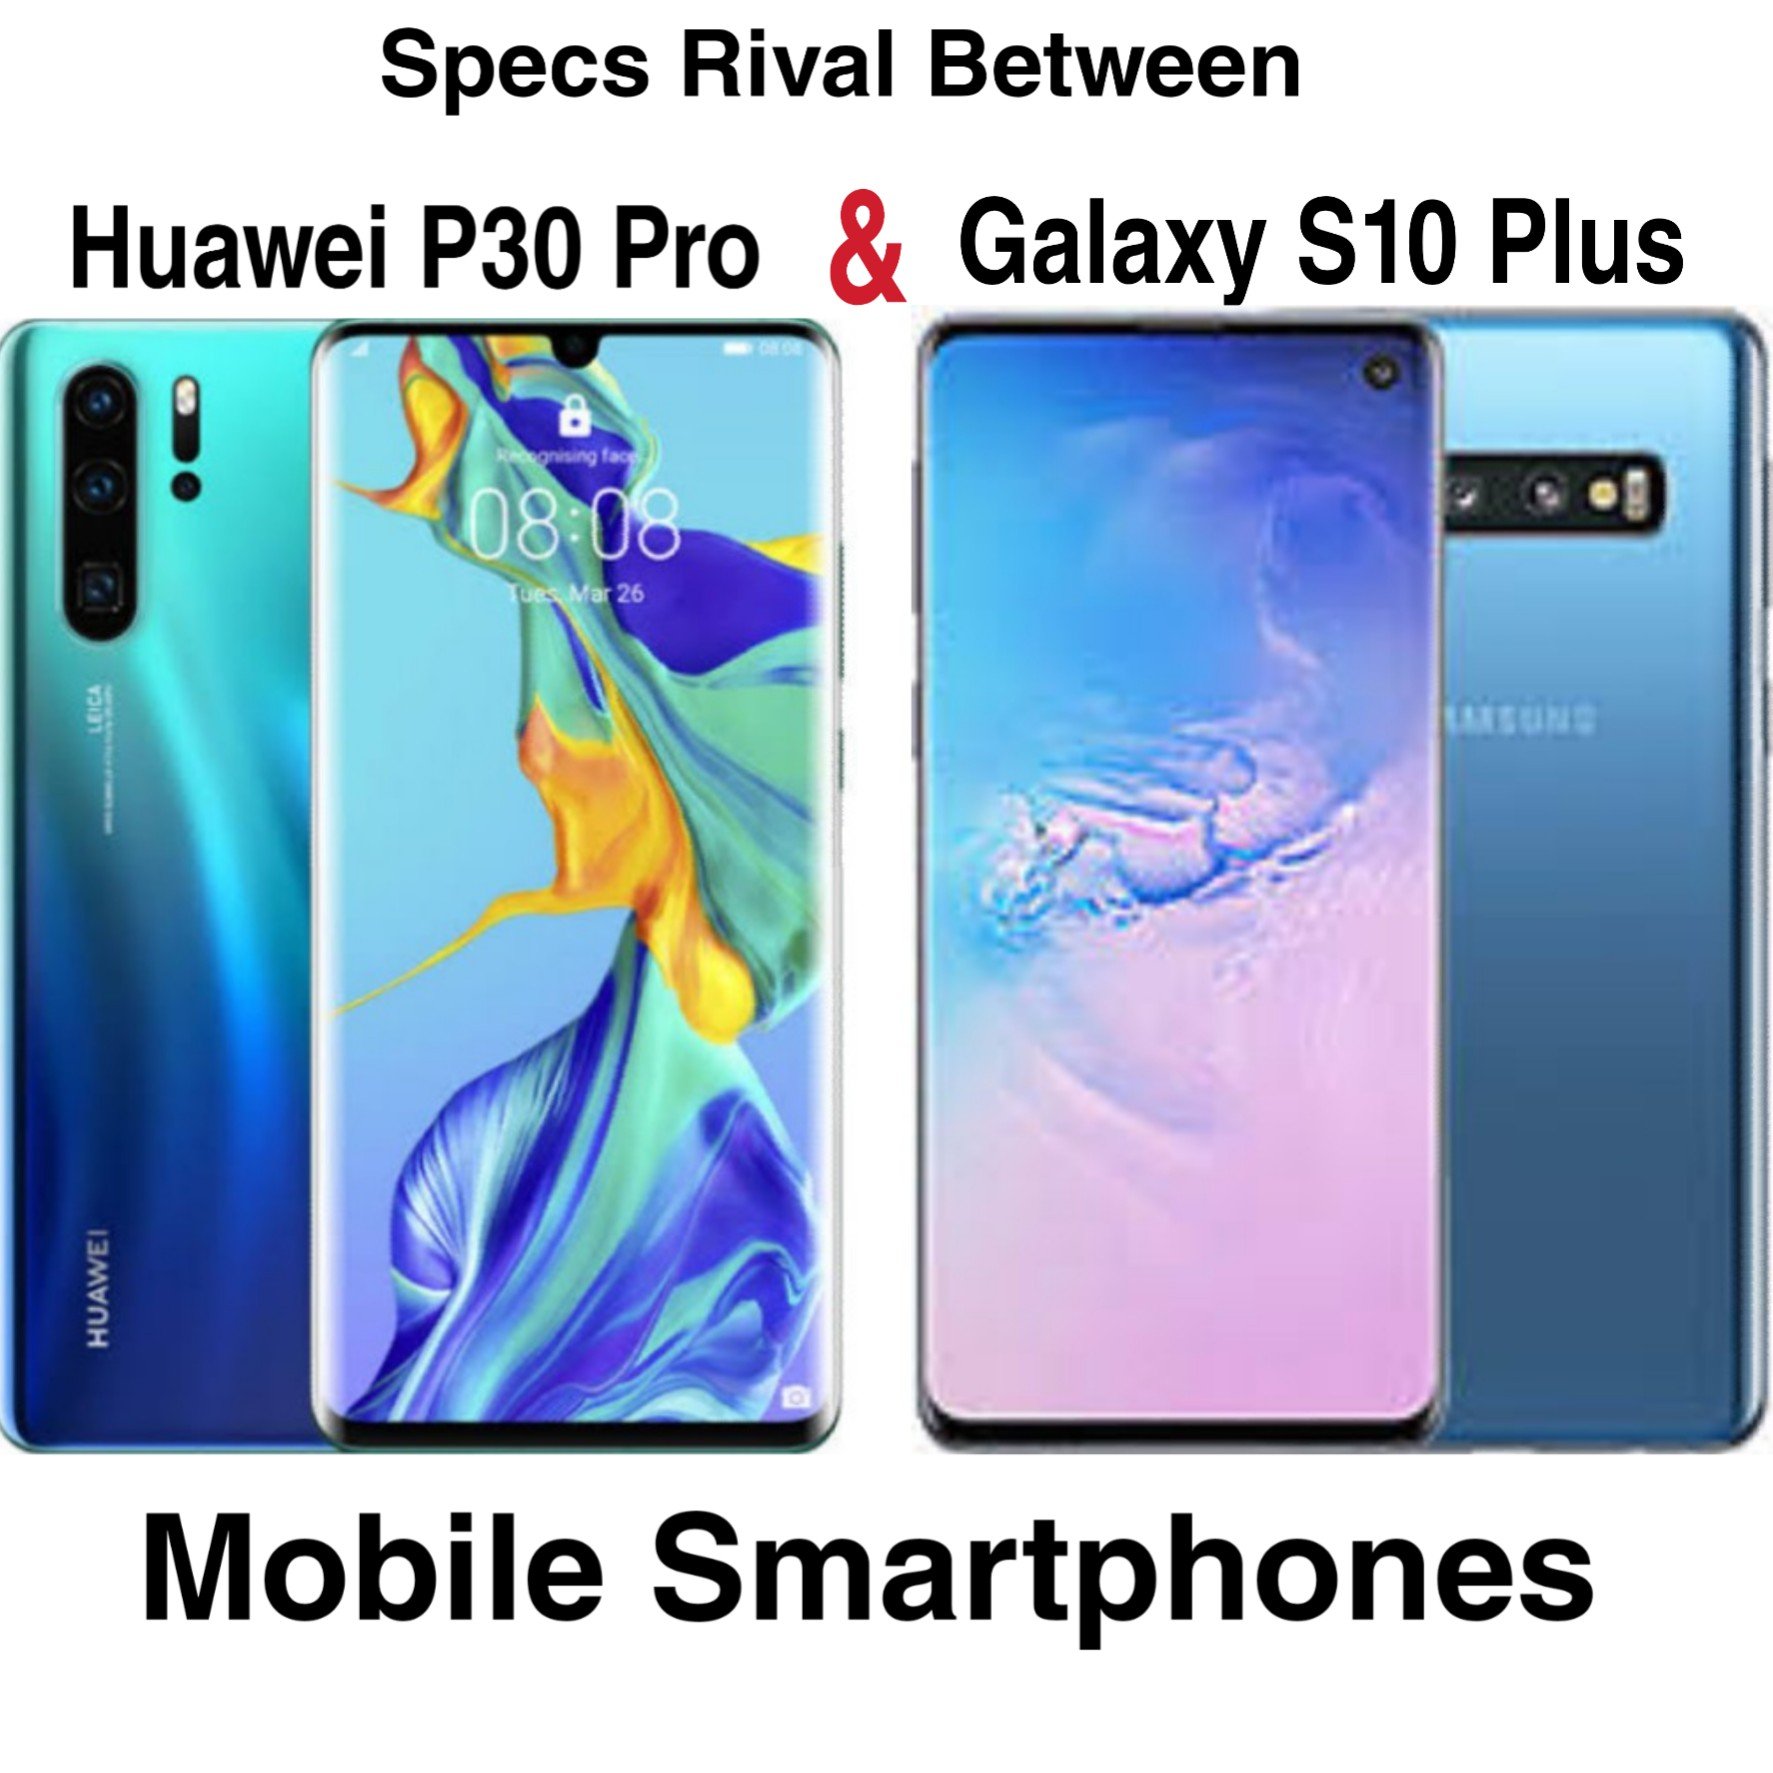 buy-galaxy-s10-plus-and-huawei-p30-pro-specs